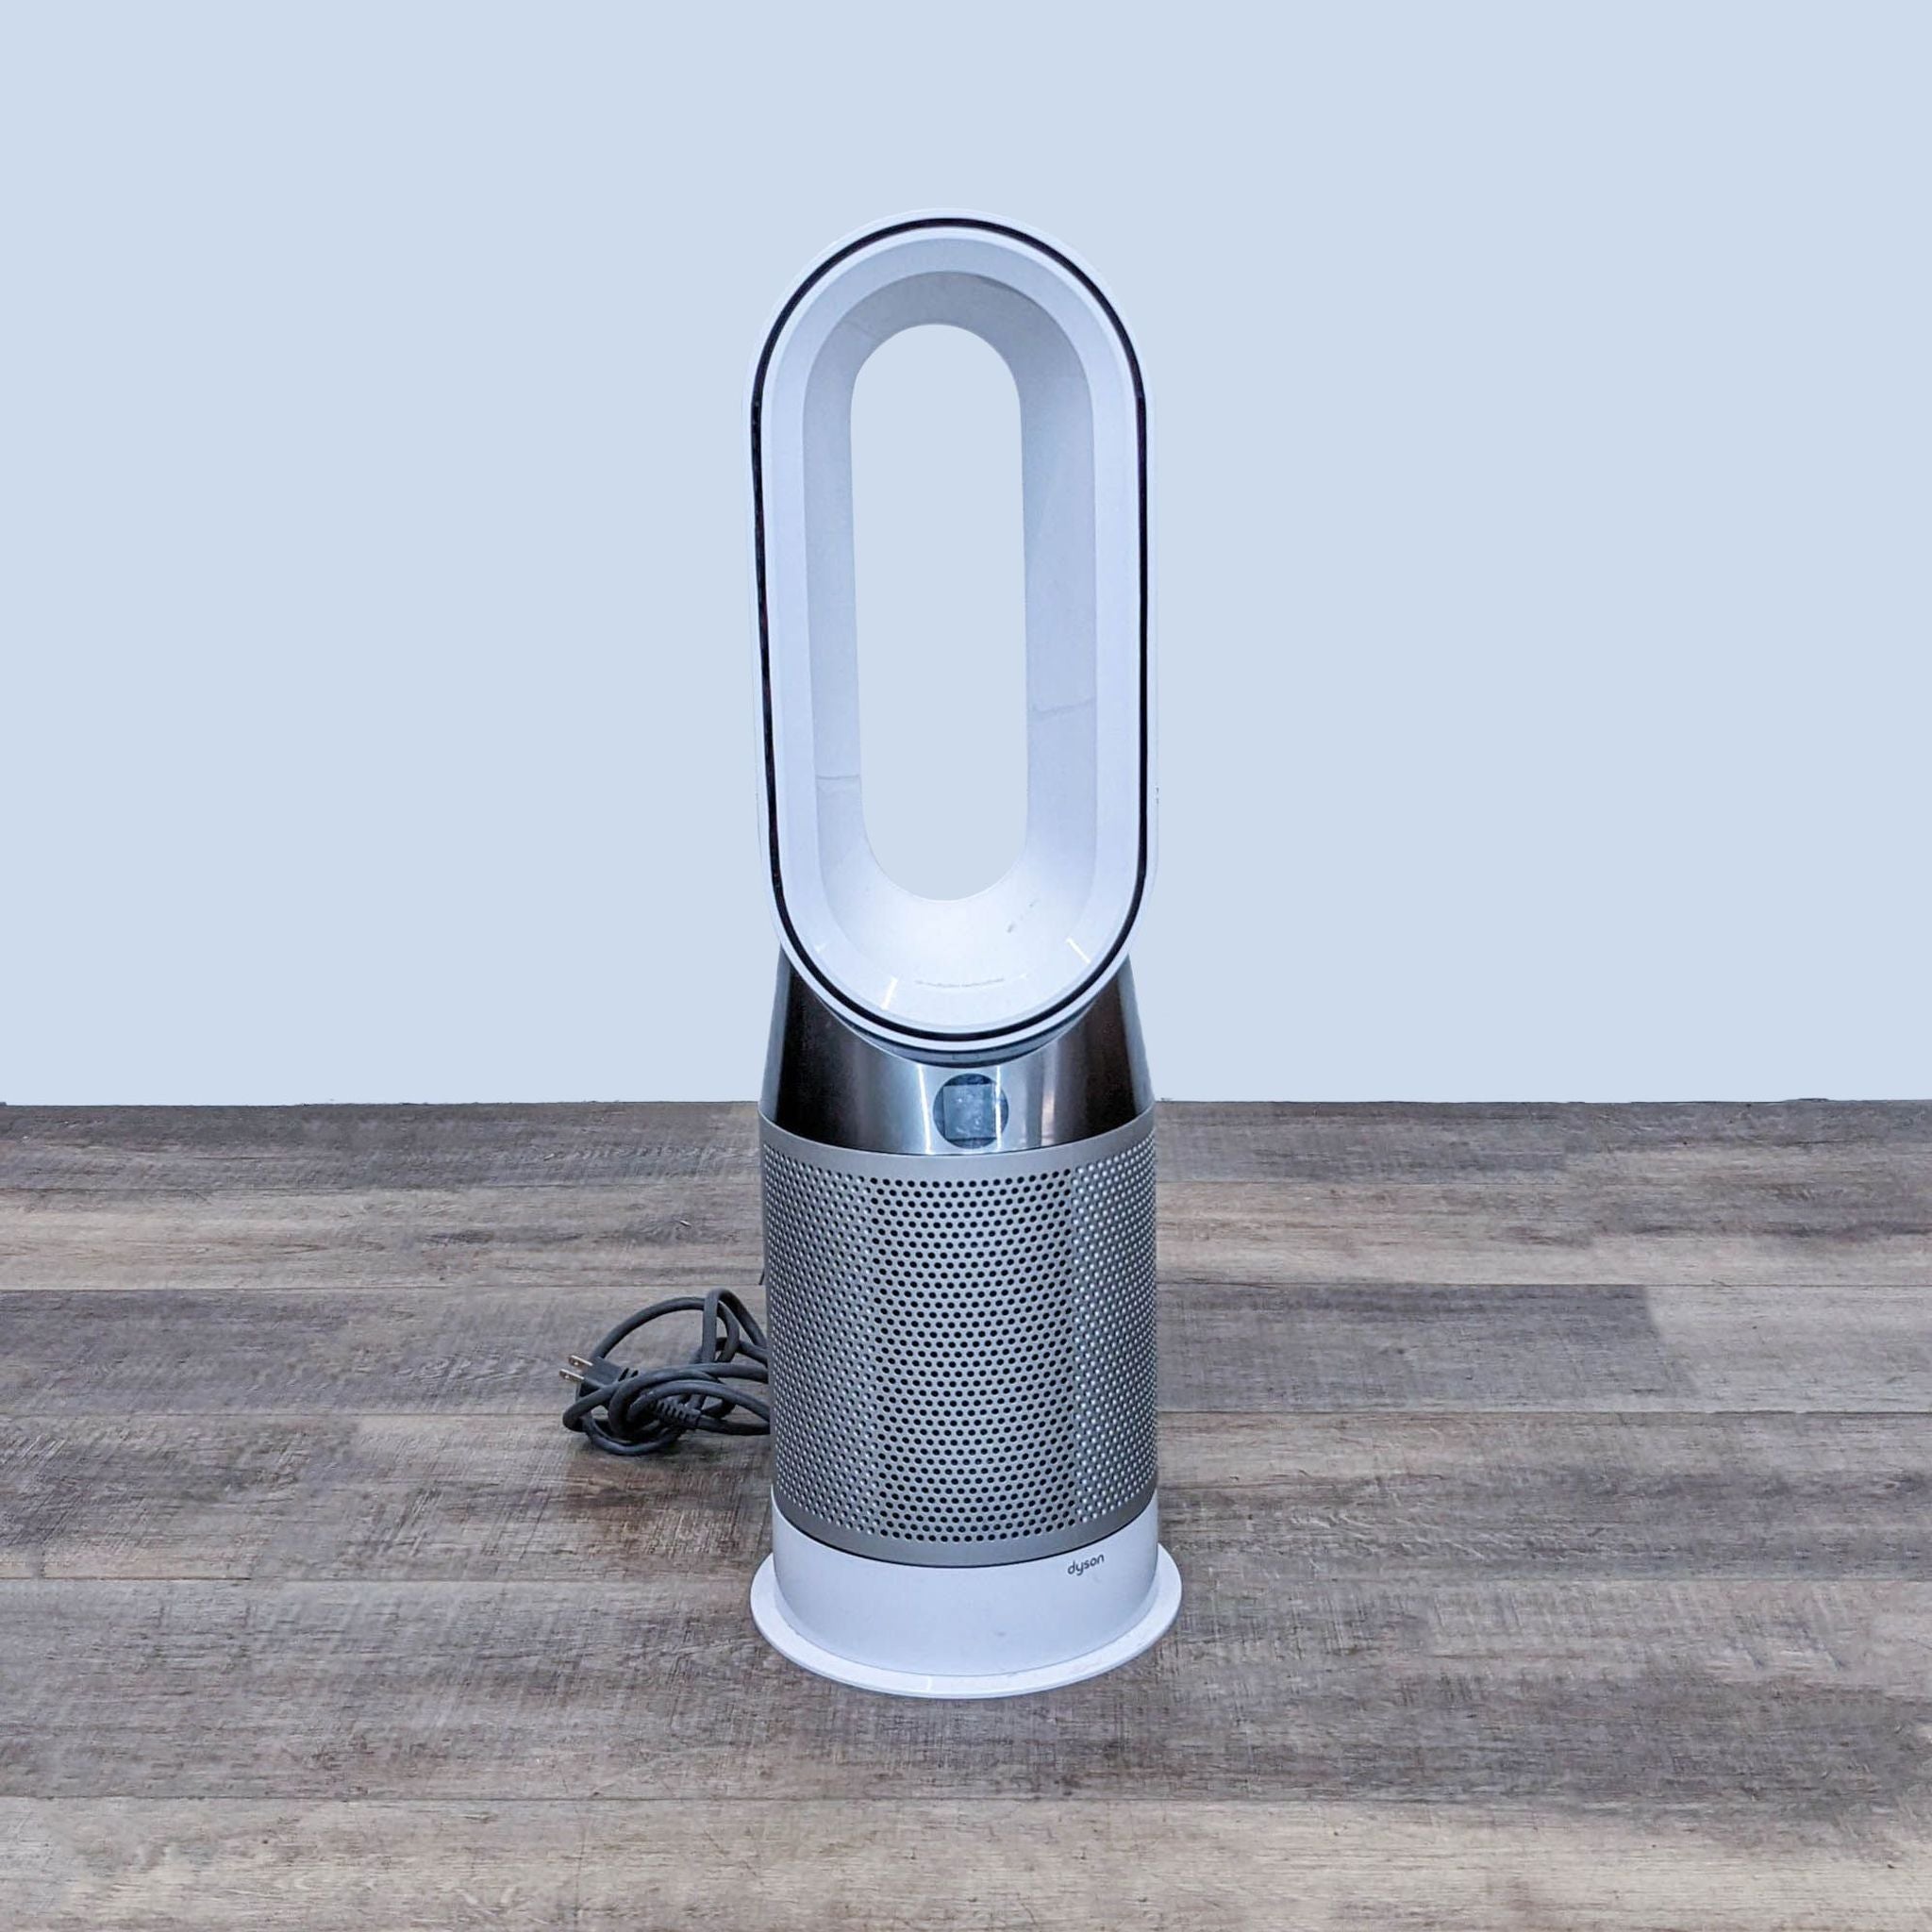 Dyson Purifier Cool Gen1 TP10 HEPA air purifier and fan, capturing ultrafine particles, white and silver design.